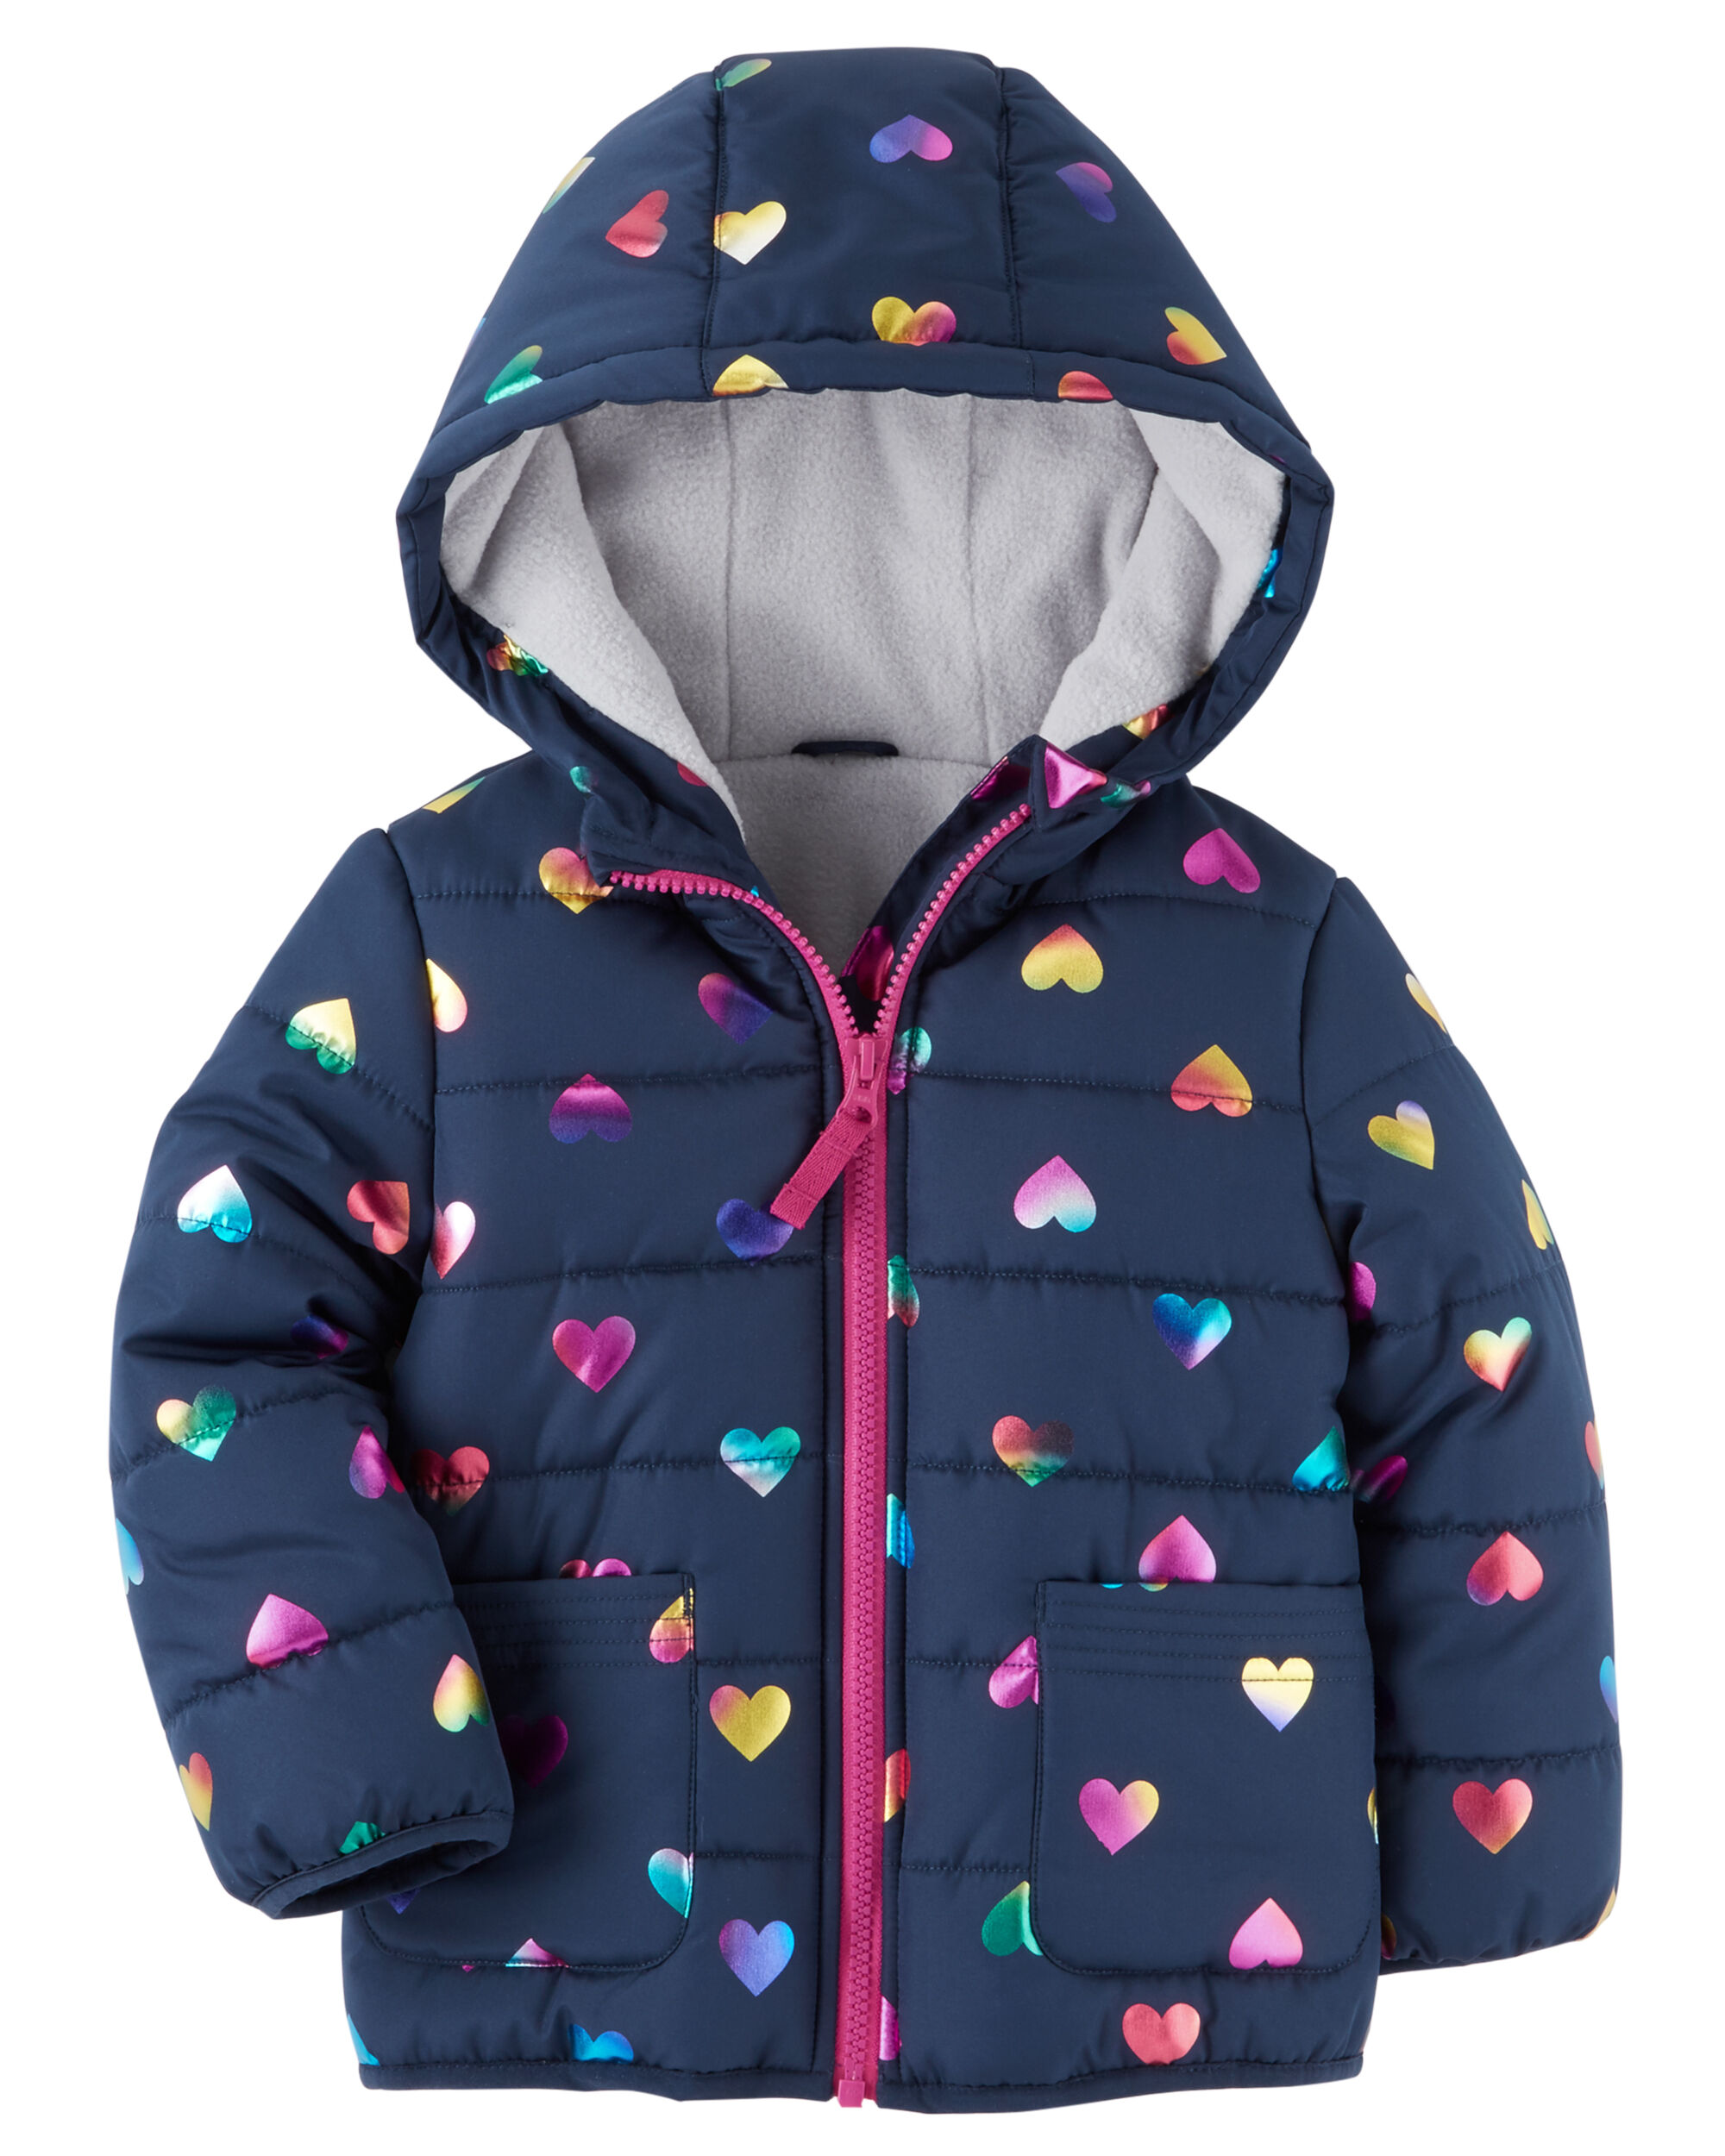 Simple Joys by Carter's Toddler Girls' Hooded Felt Jacket with Faux Fur Trim